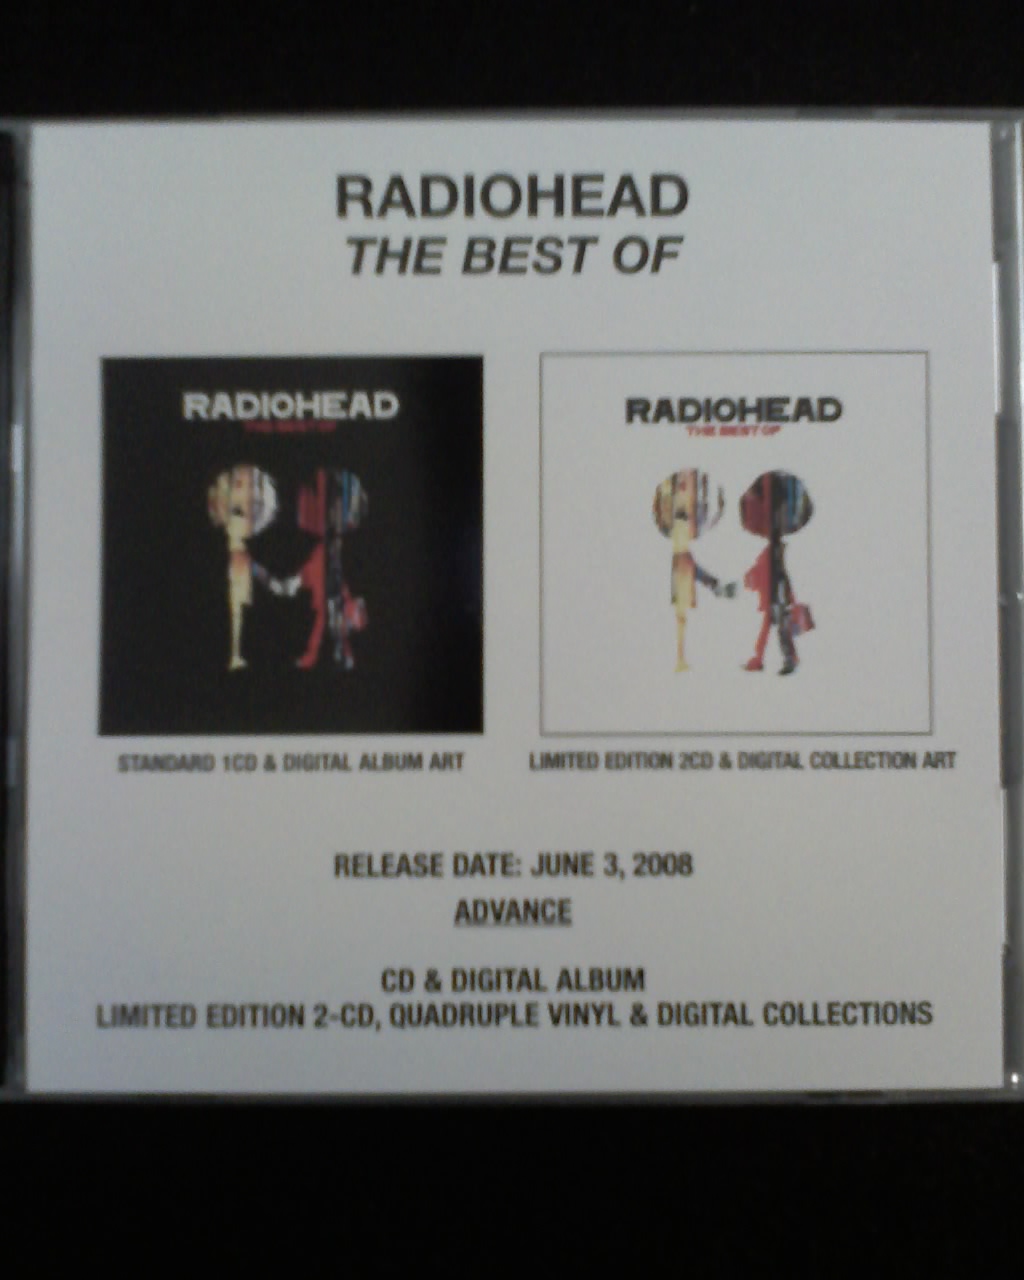 [000-radiohead-the_best_of-(advance)-2cd-2008-front.jpg]